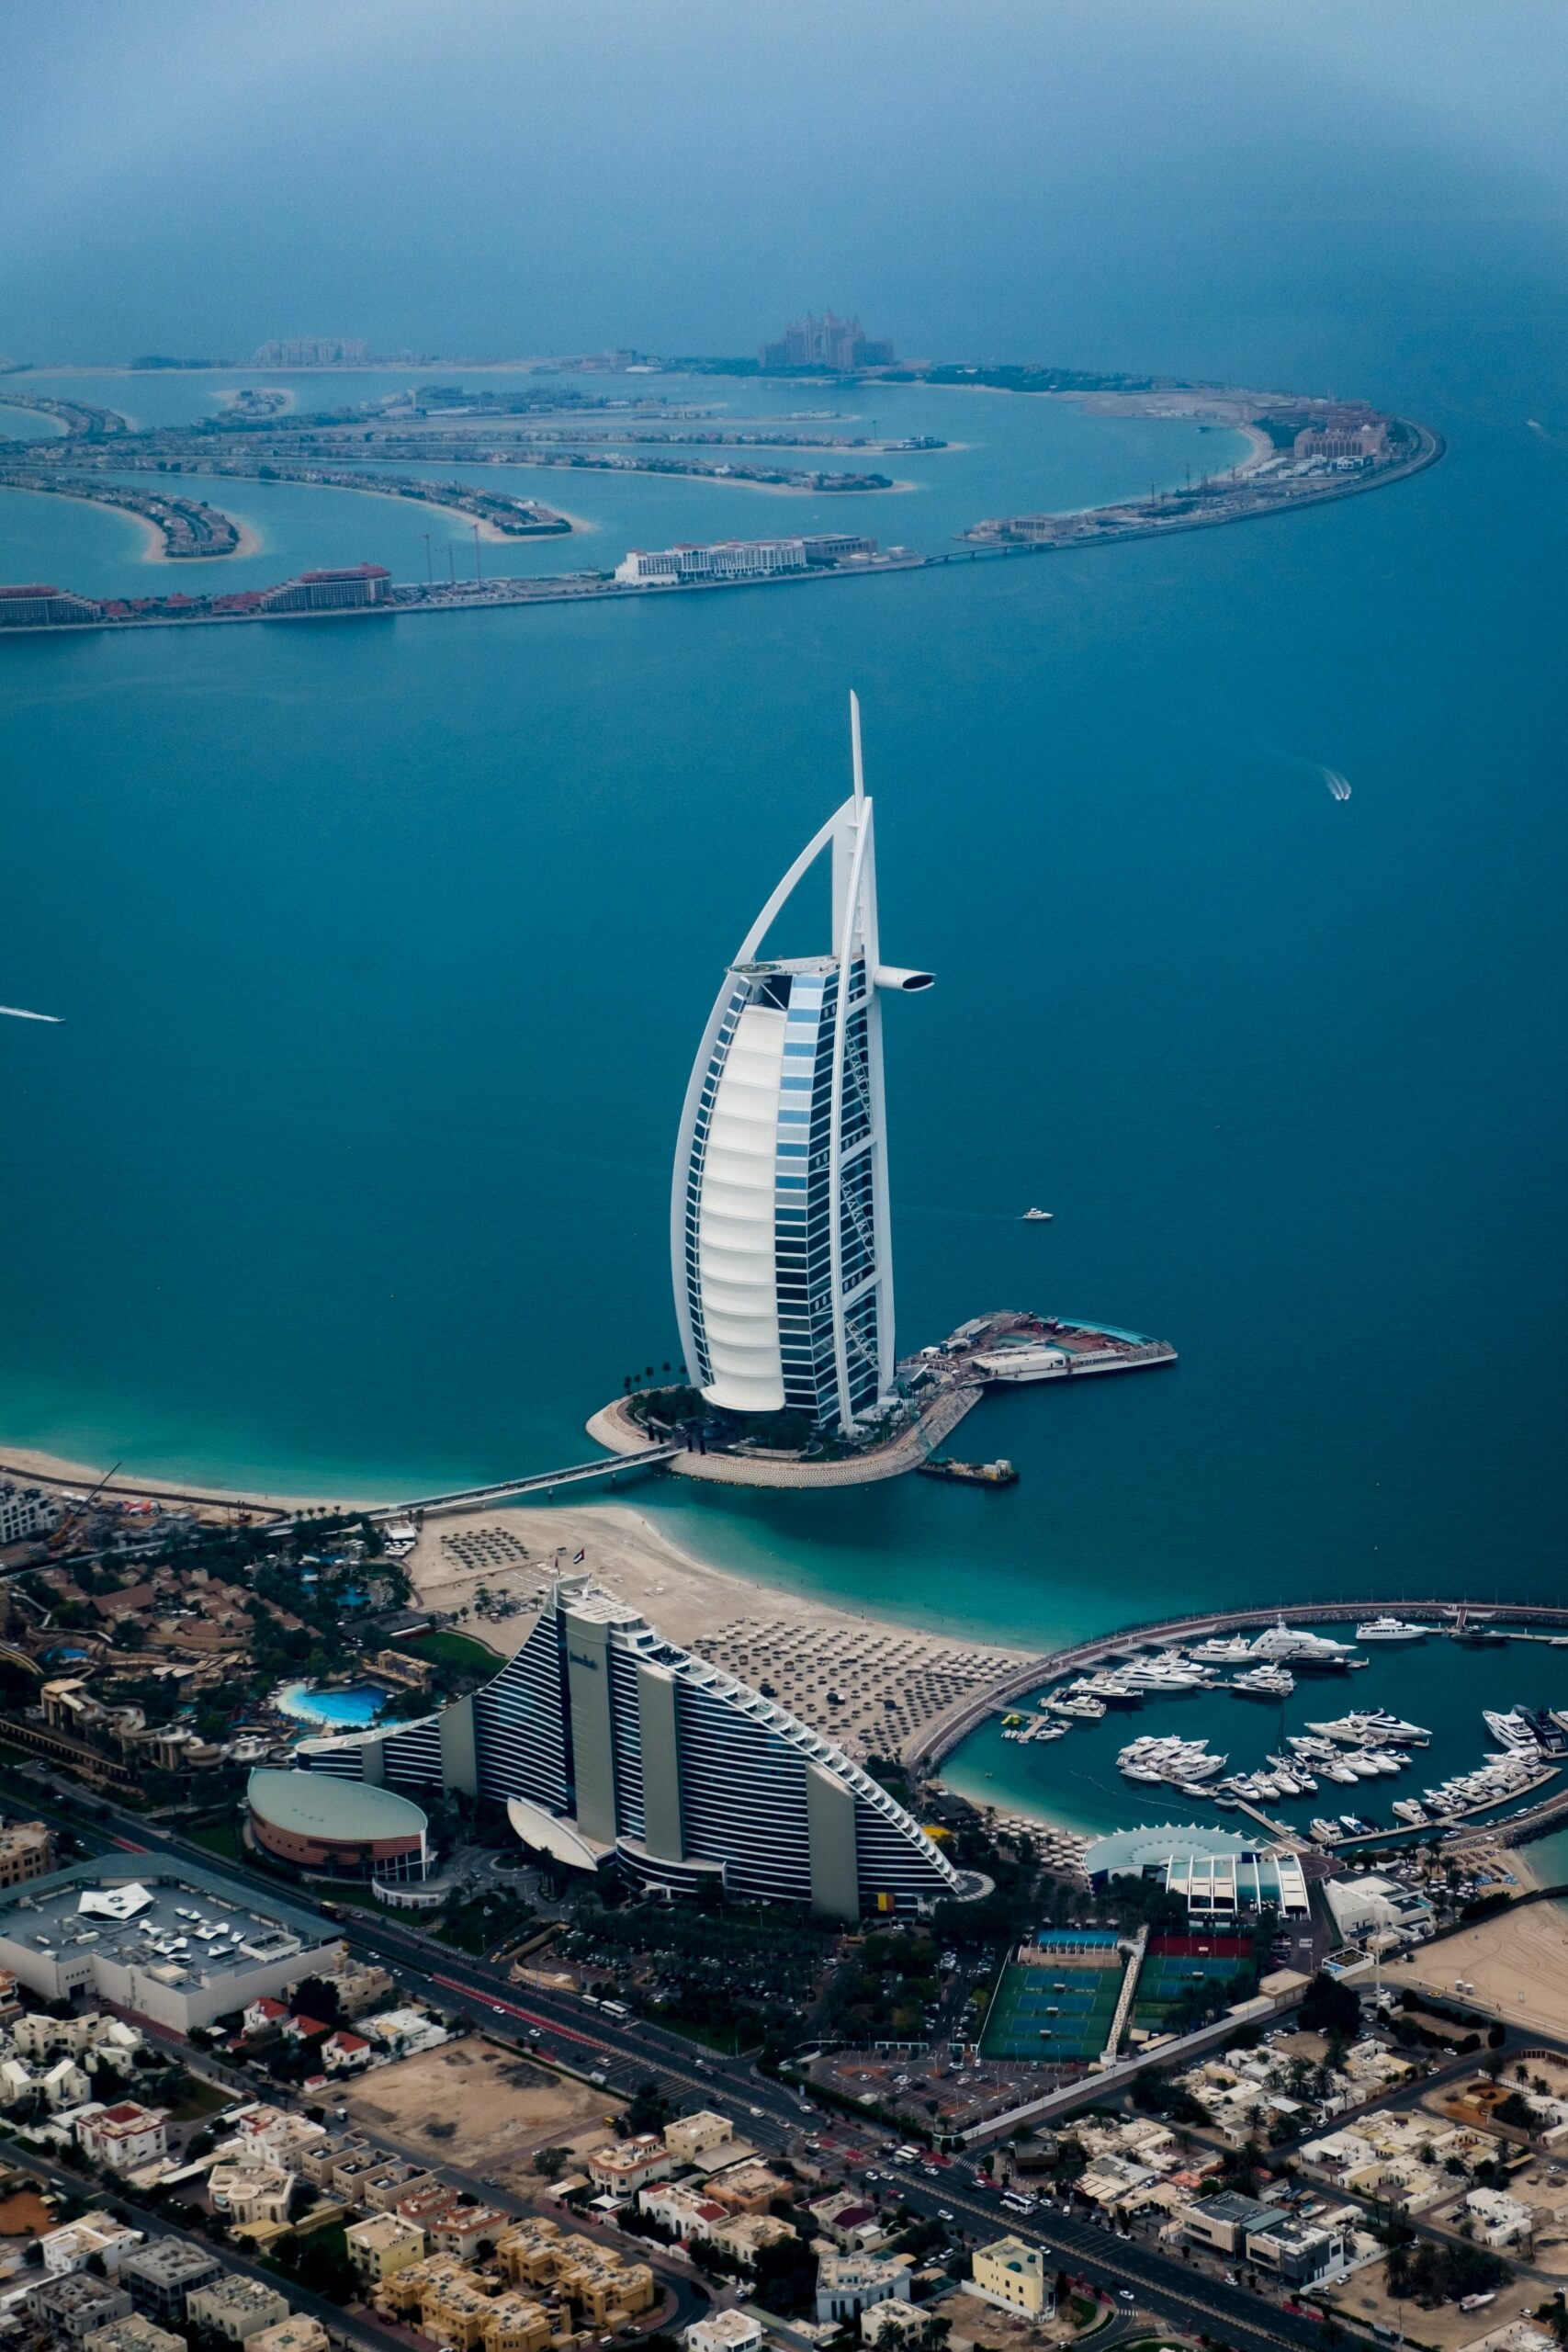 Is Dubai a city or a country or both?